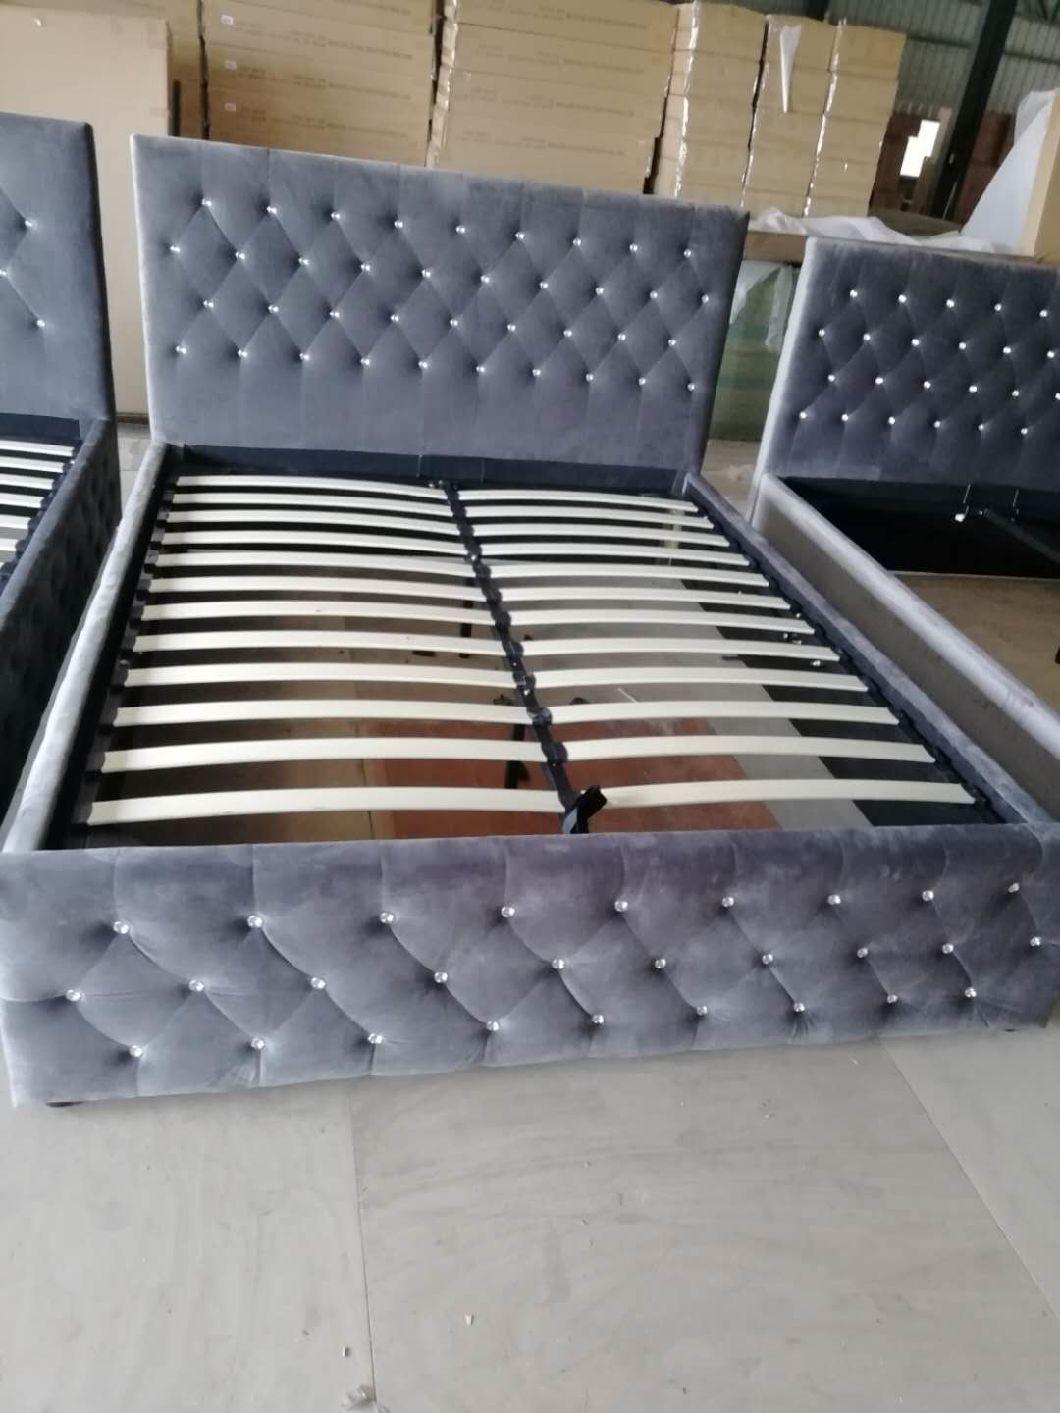 European Environmental Standard Leather Double Bed